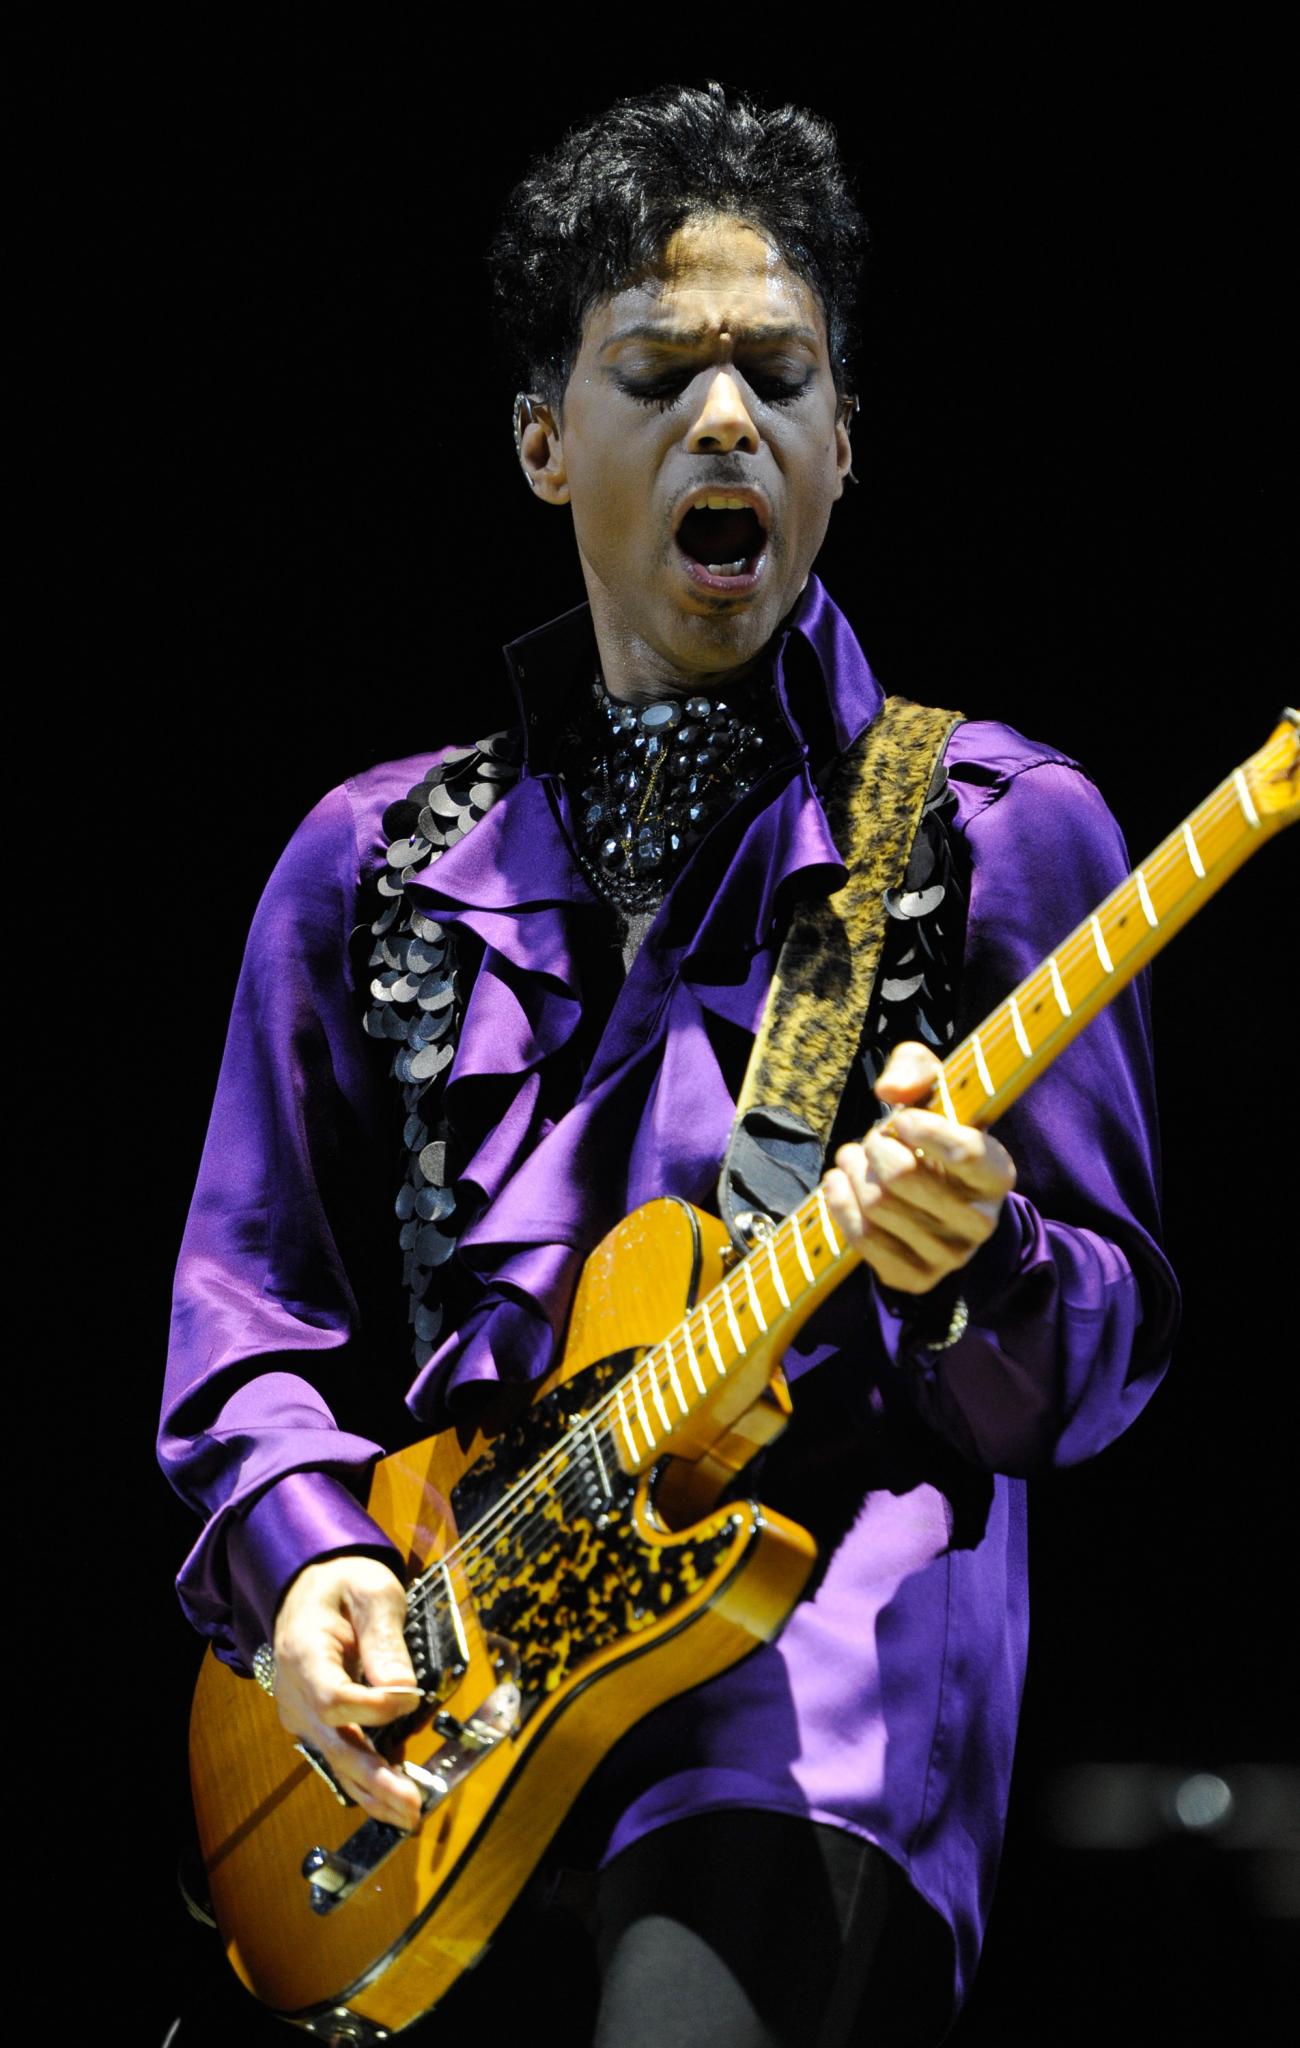 What's Your Favorite Prince Song?